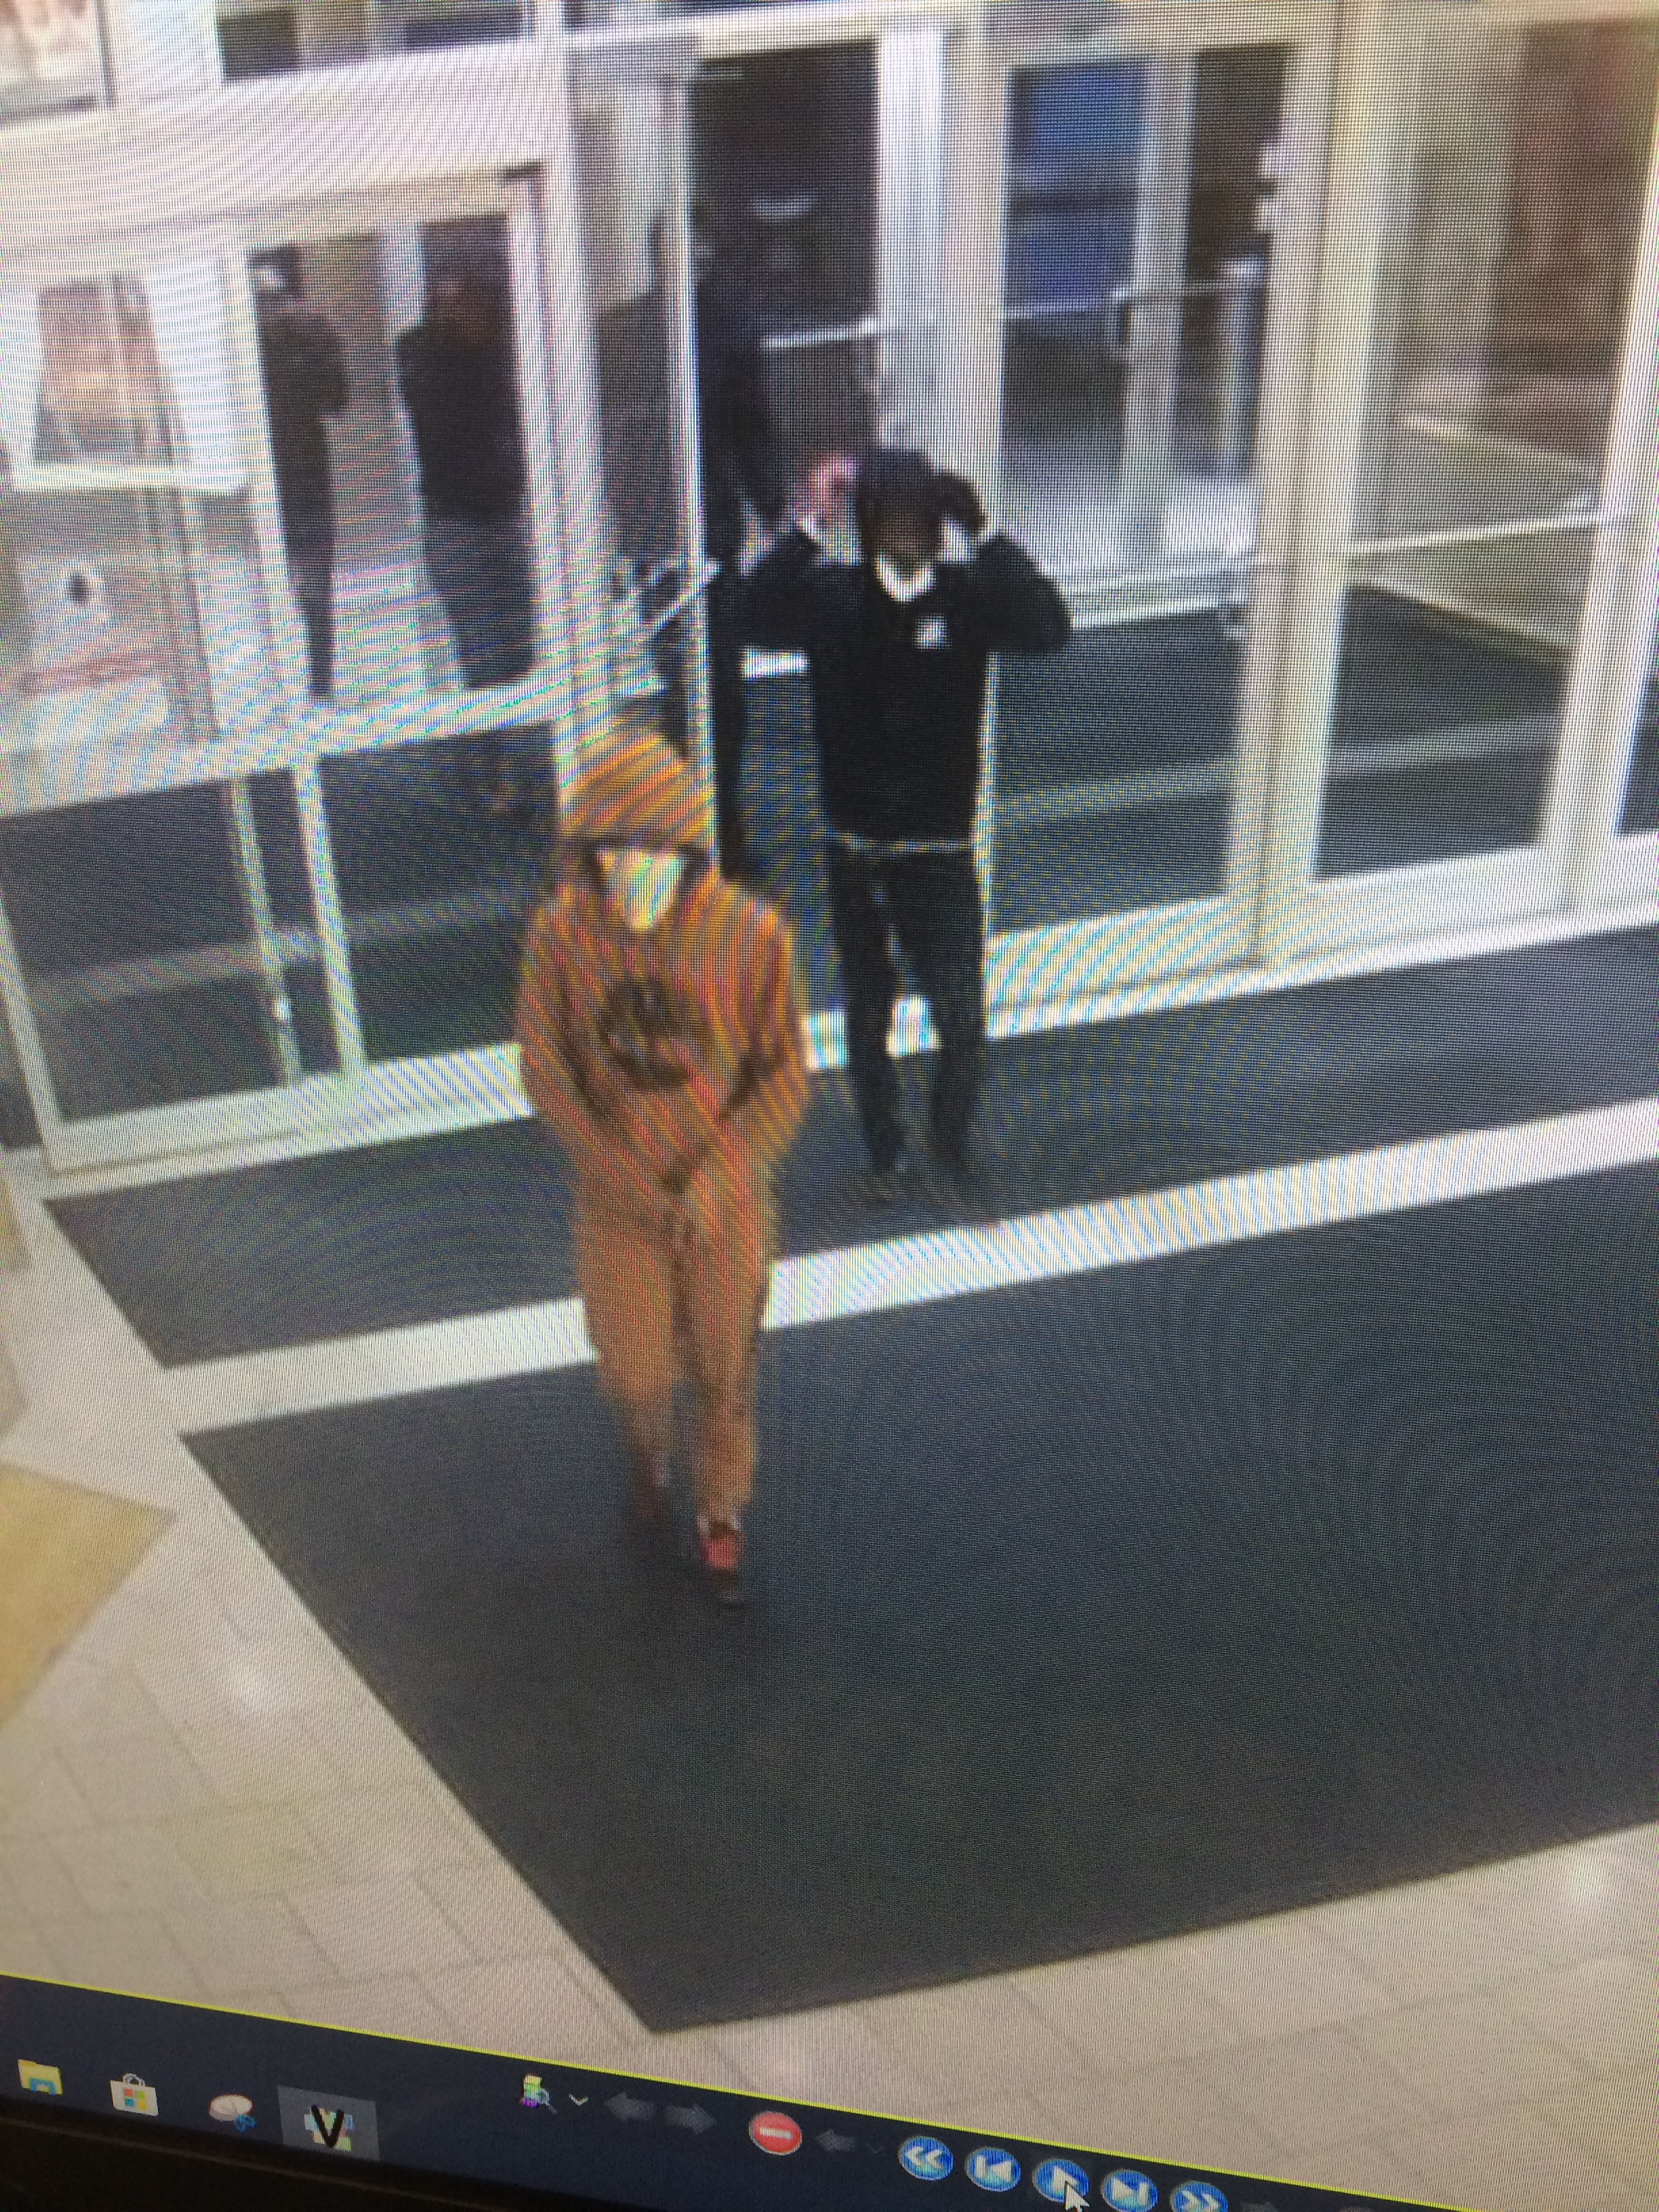 Images Show Similar Outfits For Suspects In Louis Vuitton Thefts – CBS Chicago